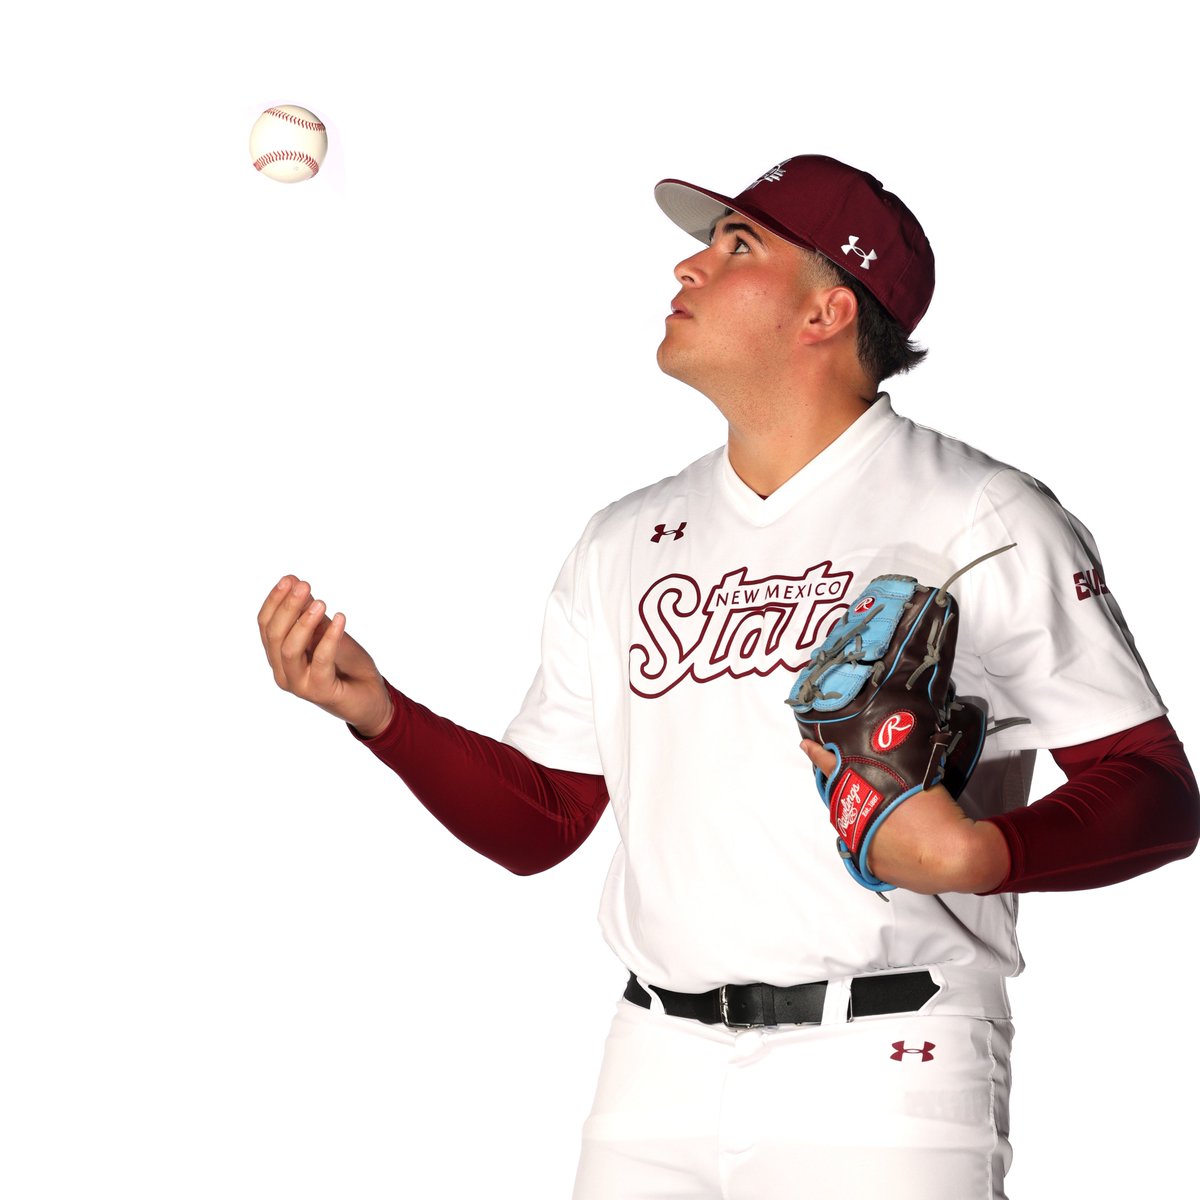 Soto enters the game with two runners on! B6 | Aggies 1, Hilltoppers 1 #AggieUp | @saul_soto1604